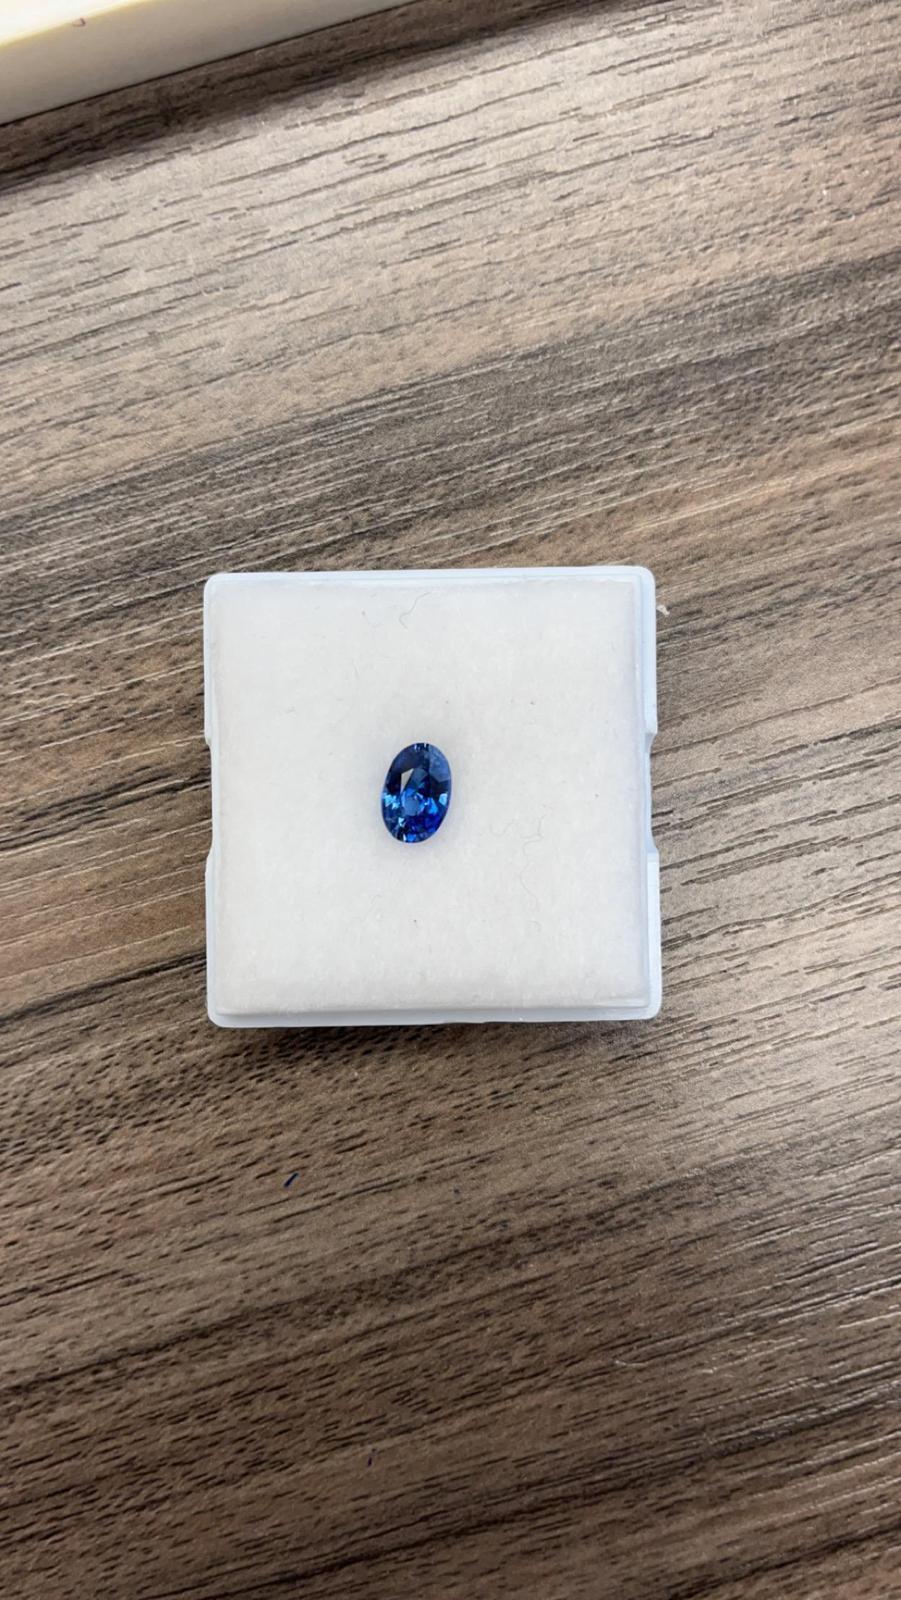 Oval Blue Sapphire weighing 1.58 carats
Measuring (7.2x6.6) mm
Blue
Gemstone is a nice and lively blue sapphire